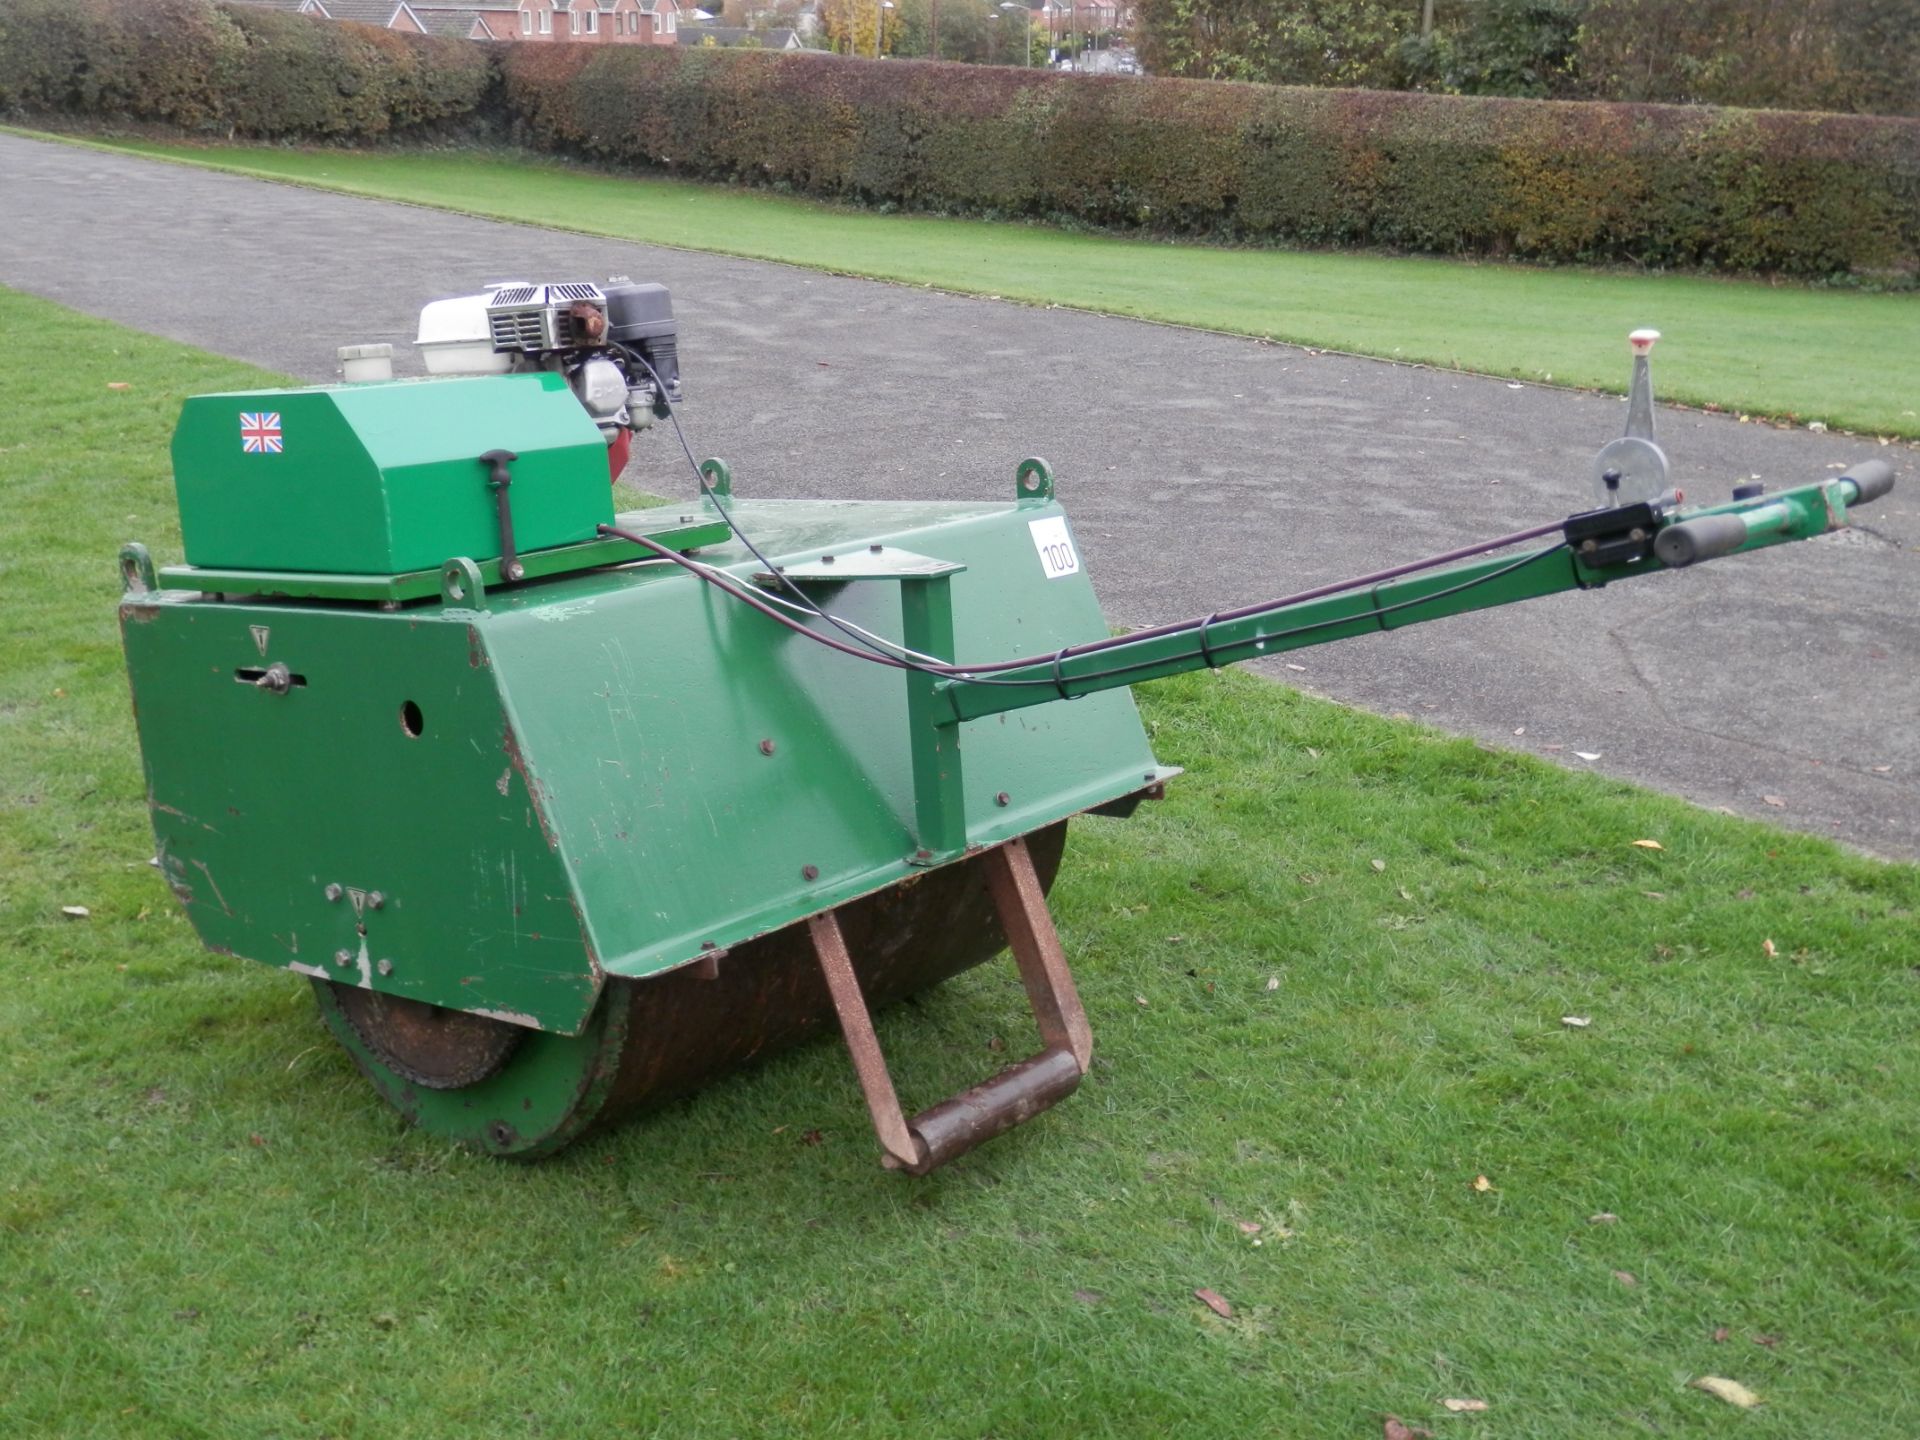 LARGE 1990S DENNIS LAWN ROLLER WITH HONDA 5 HP PETROL ENGINE. - Image 5 of 9